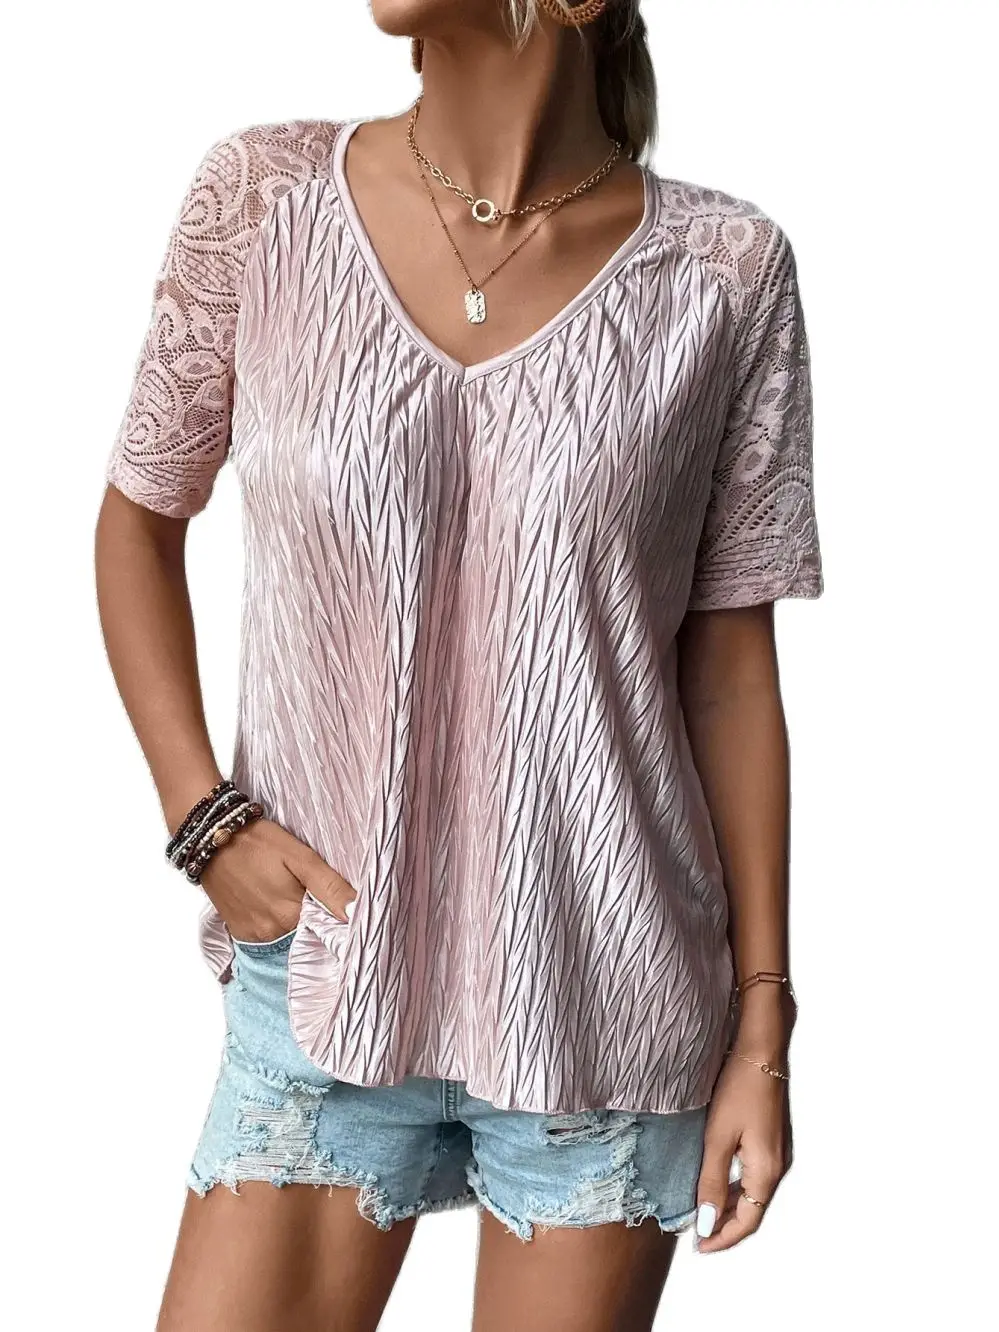 Women's Blouse 2023 Spring/Summer Spliced Lace Shirt Solid V-Neck Top Loose Short Sleeve Top Women